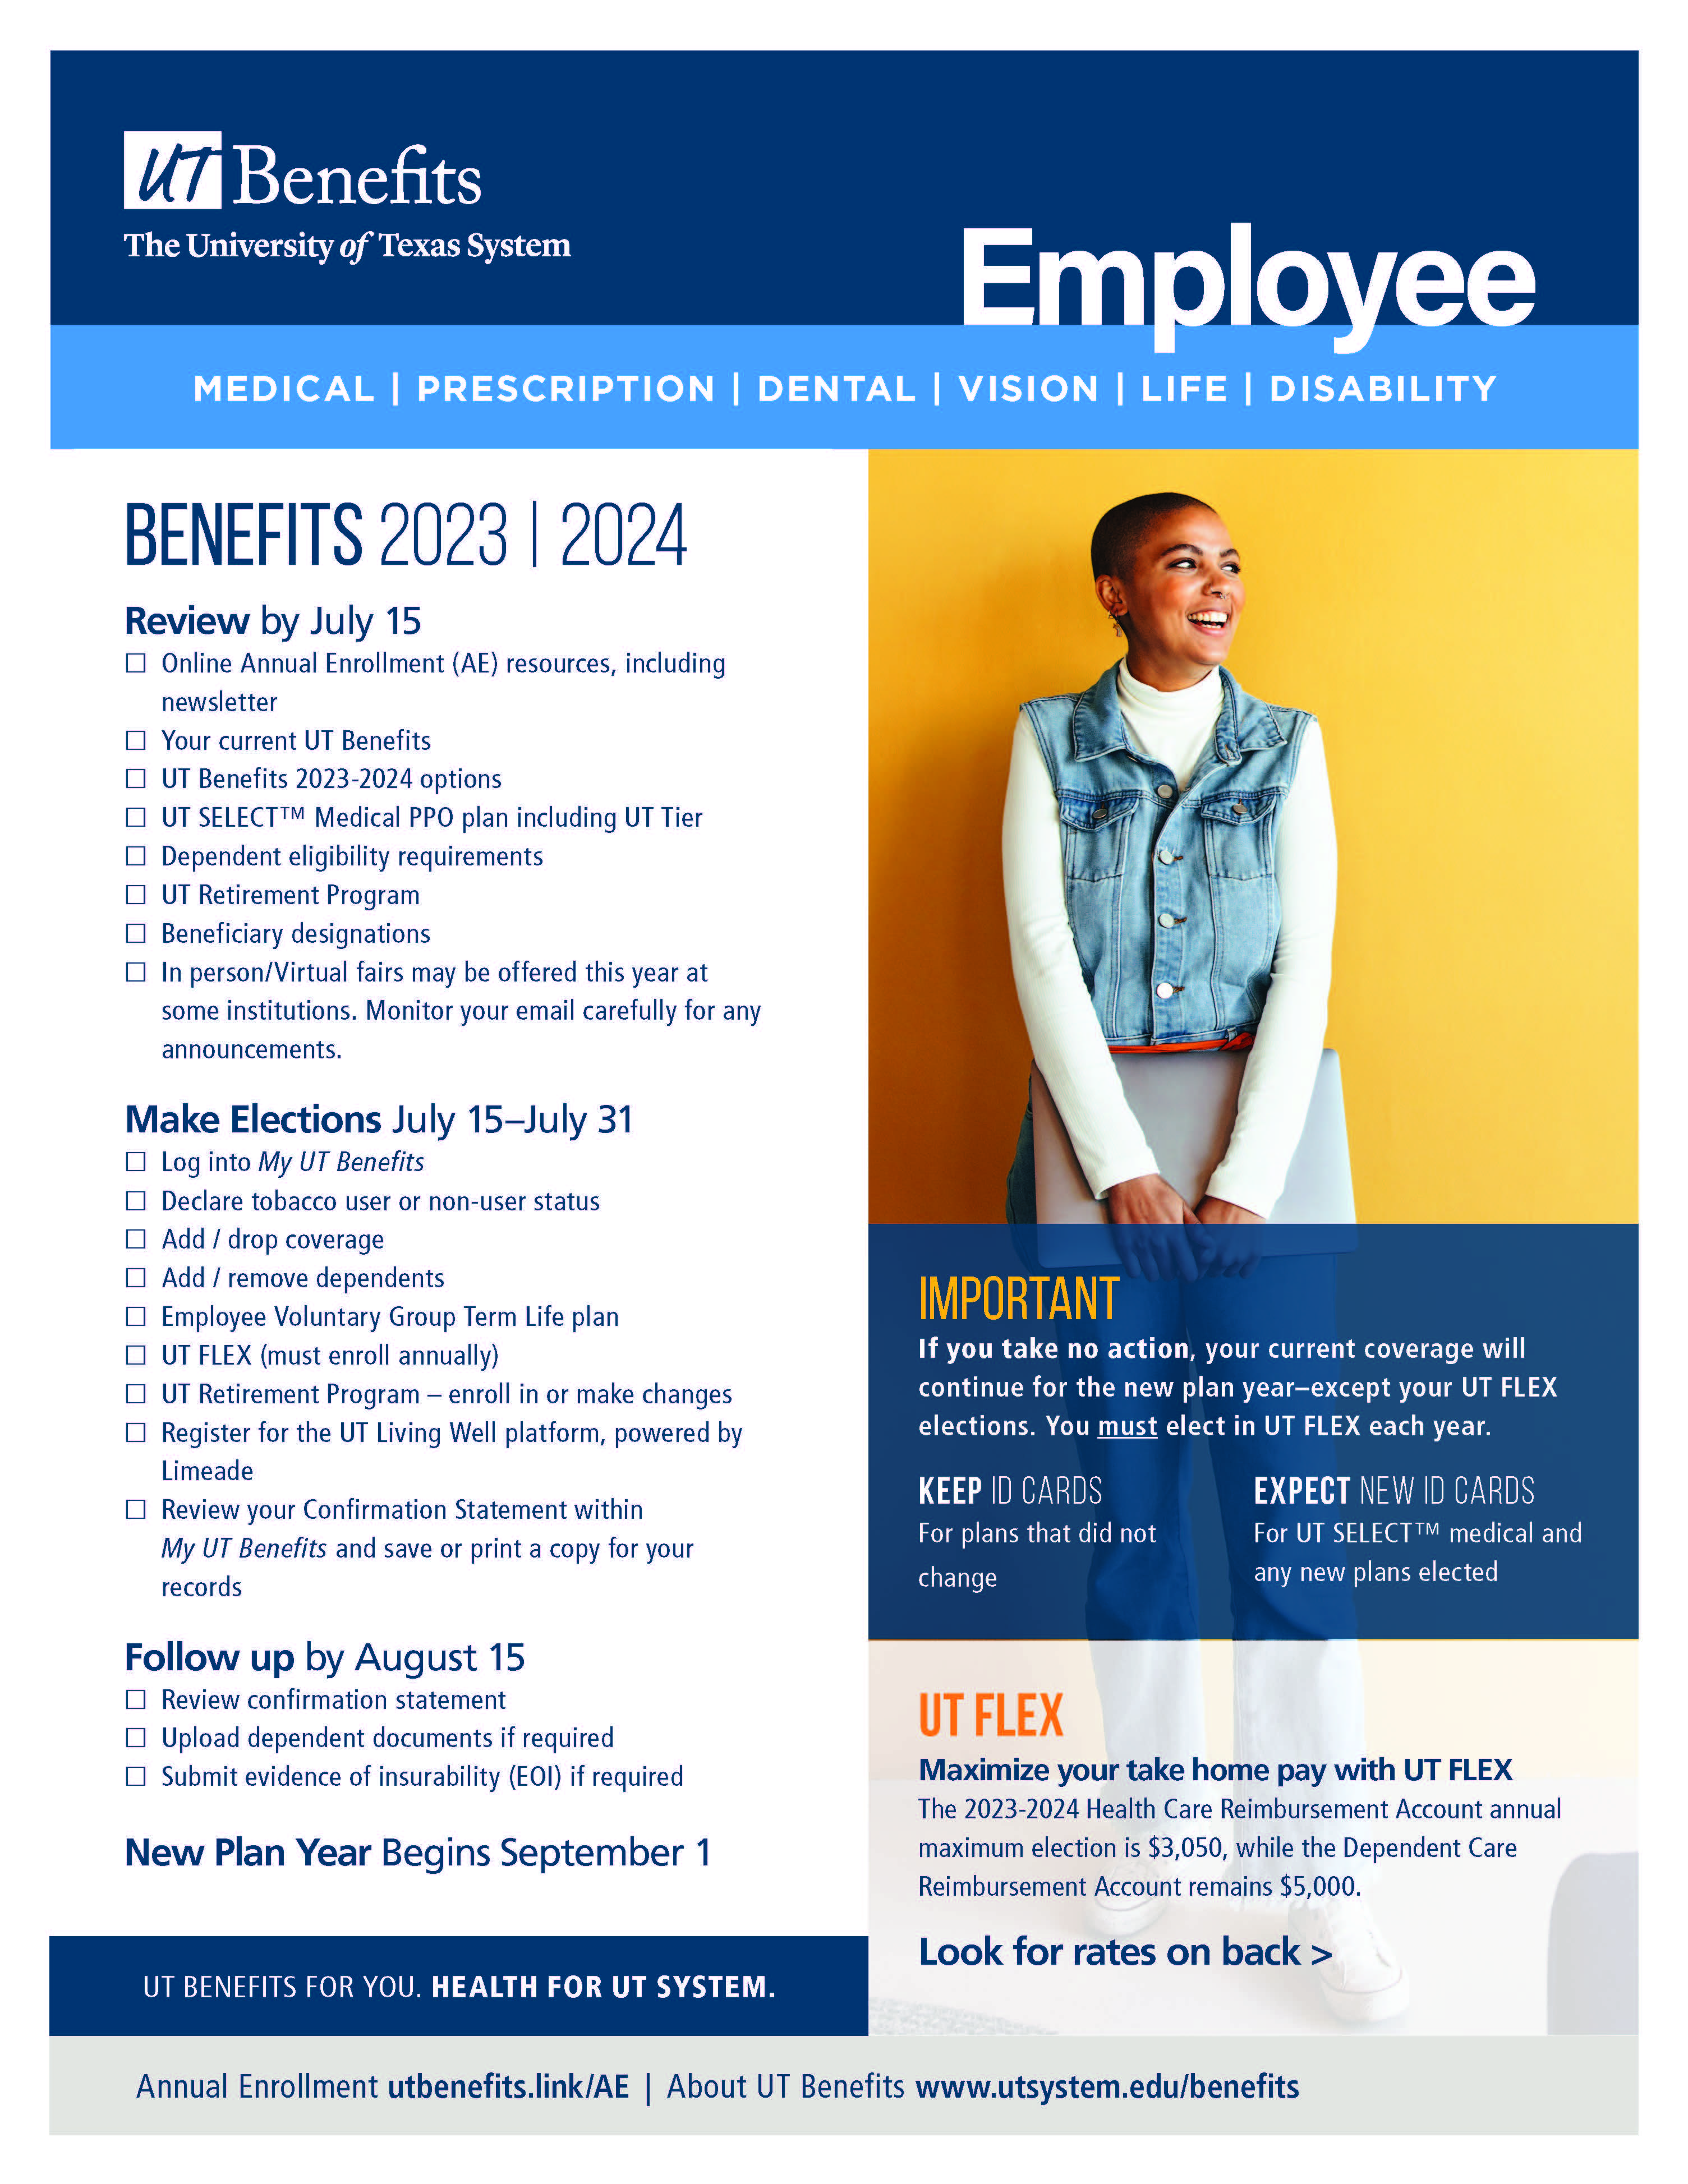 Highlights for Employees cover page